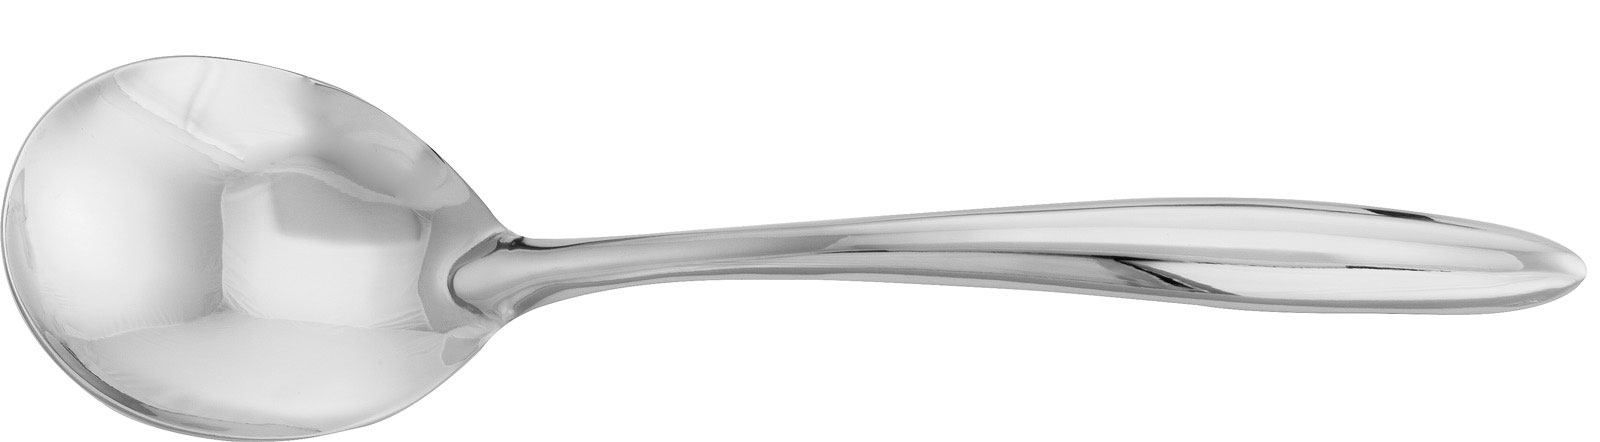 Walco Stainless ID015 Serving Spoon, Solid